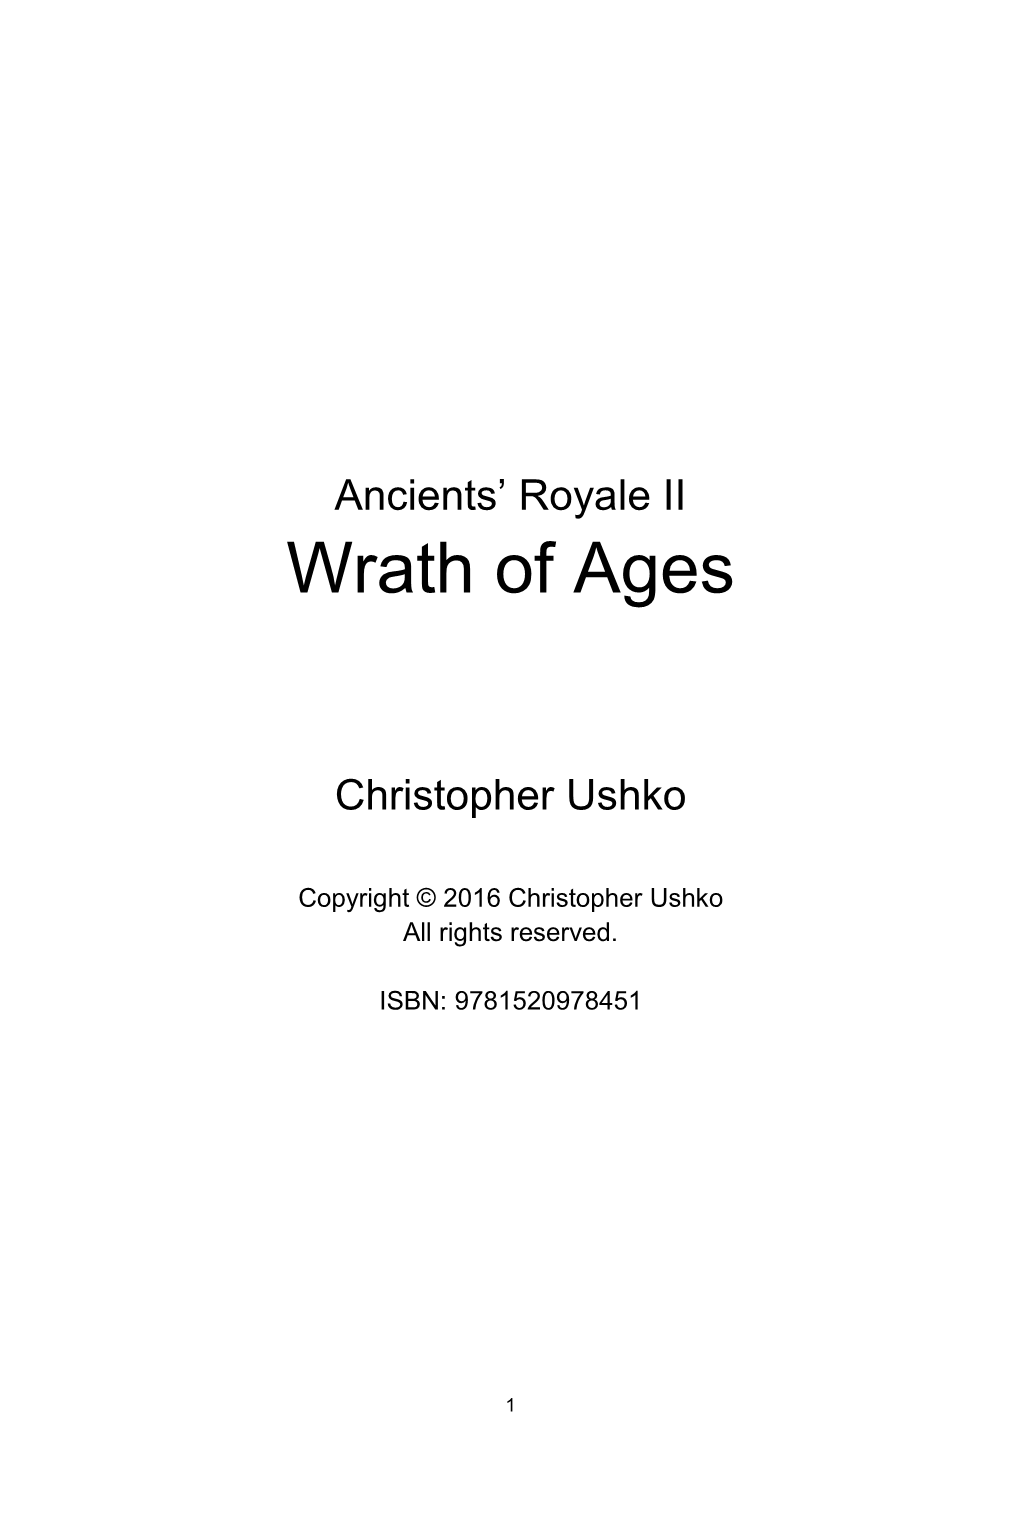 Wrath of Ages